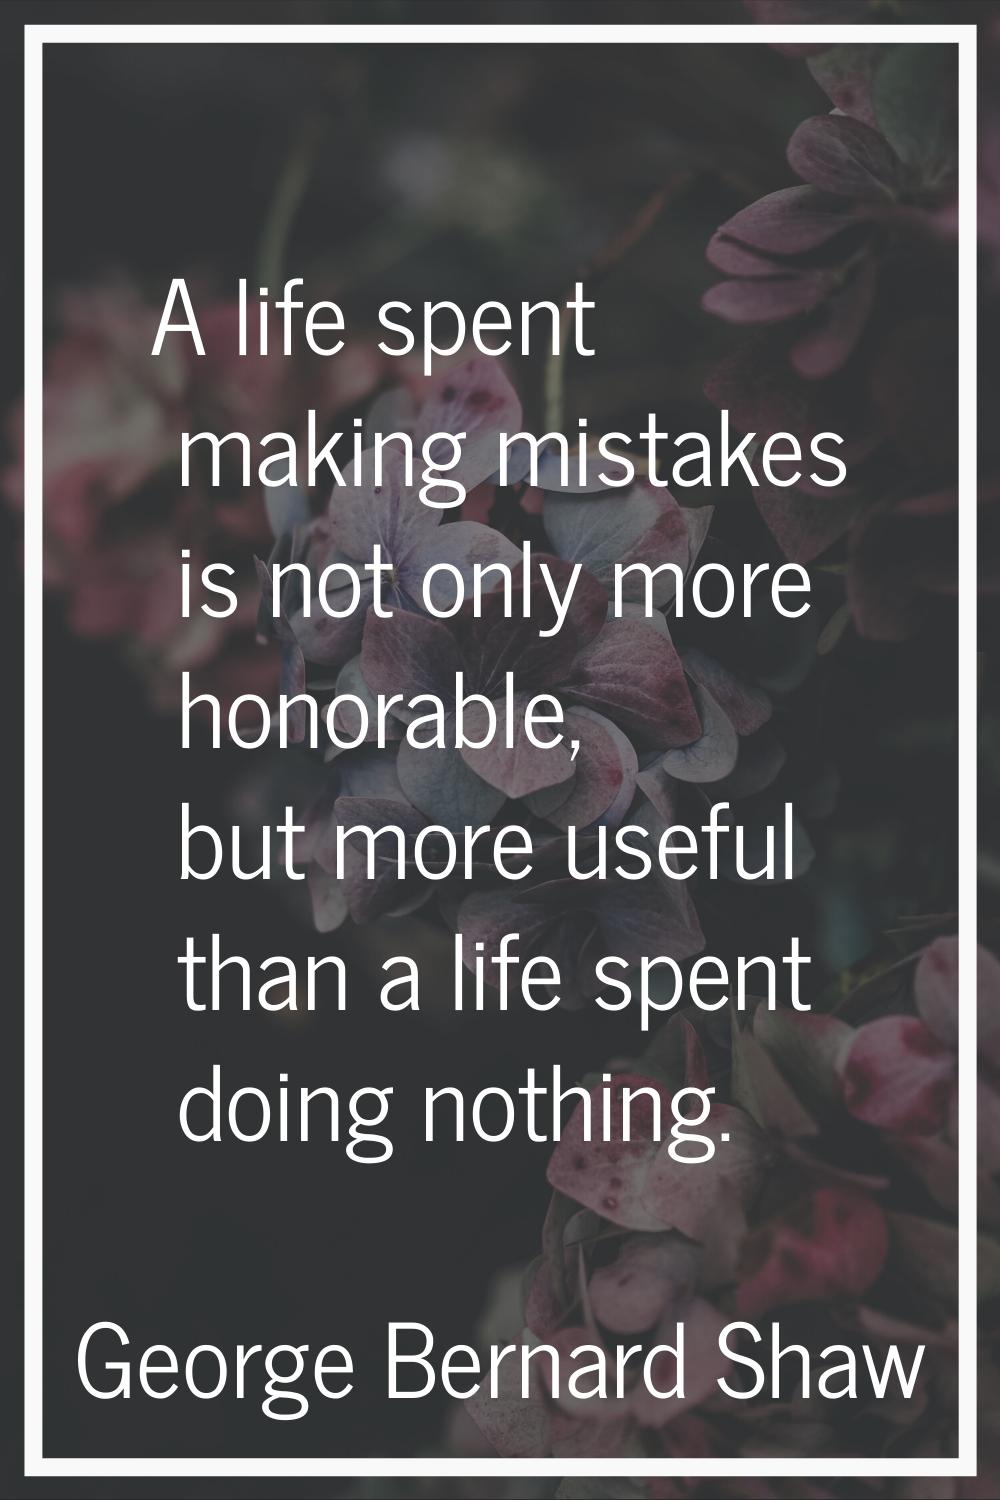 A life spent making mistakes is not only more honorable, but more useful than a life spent doing no